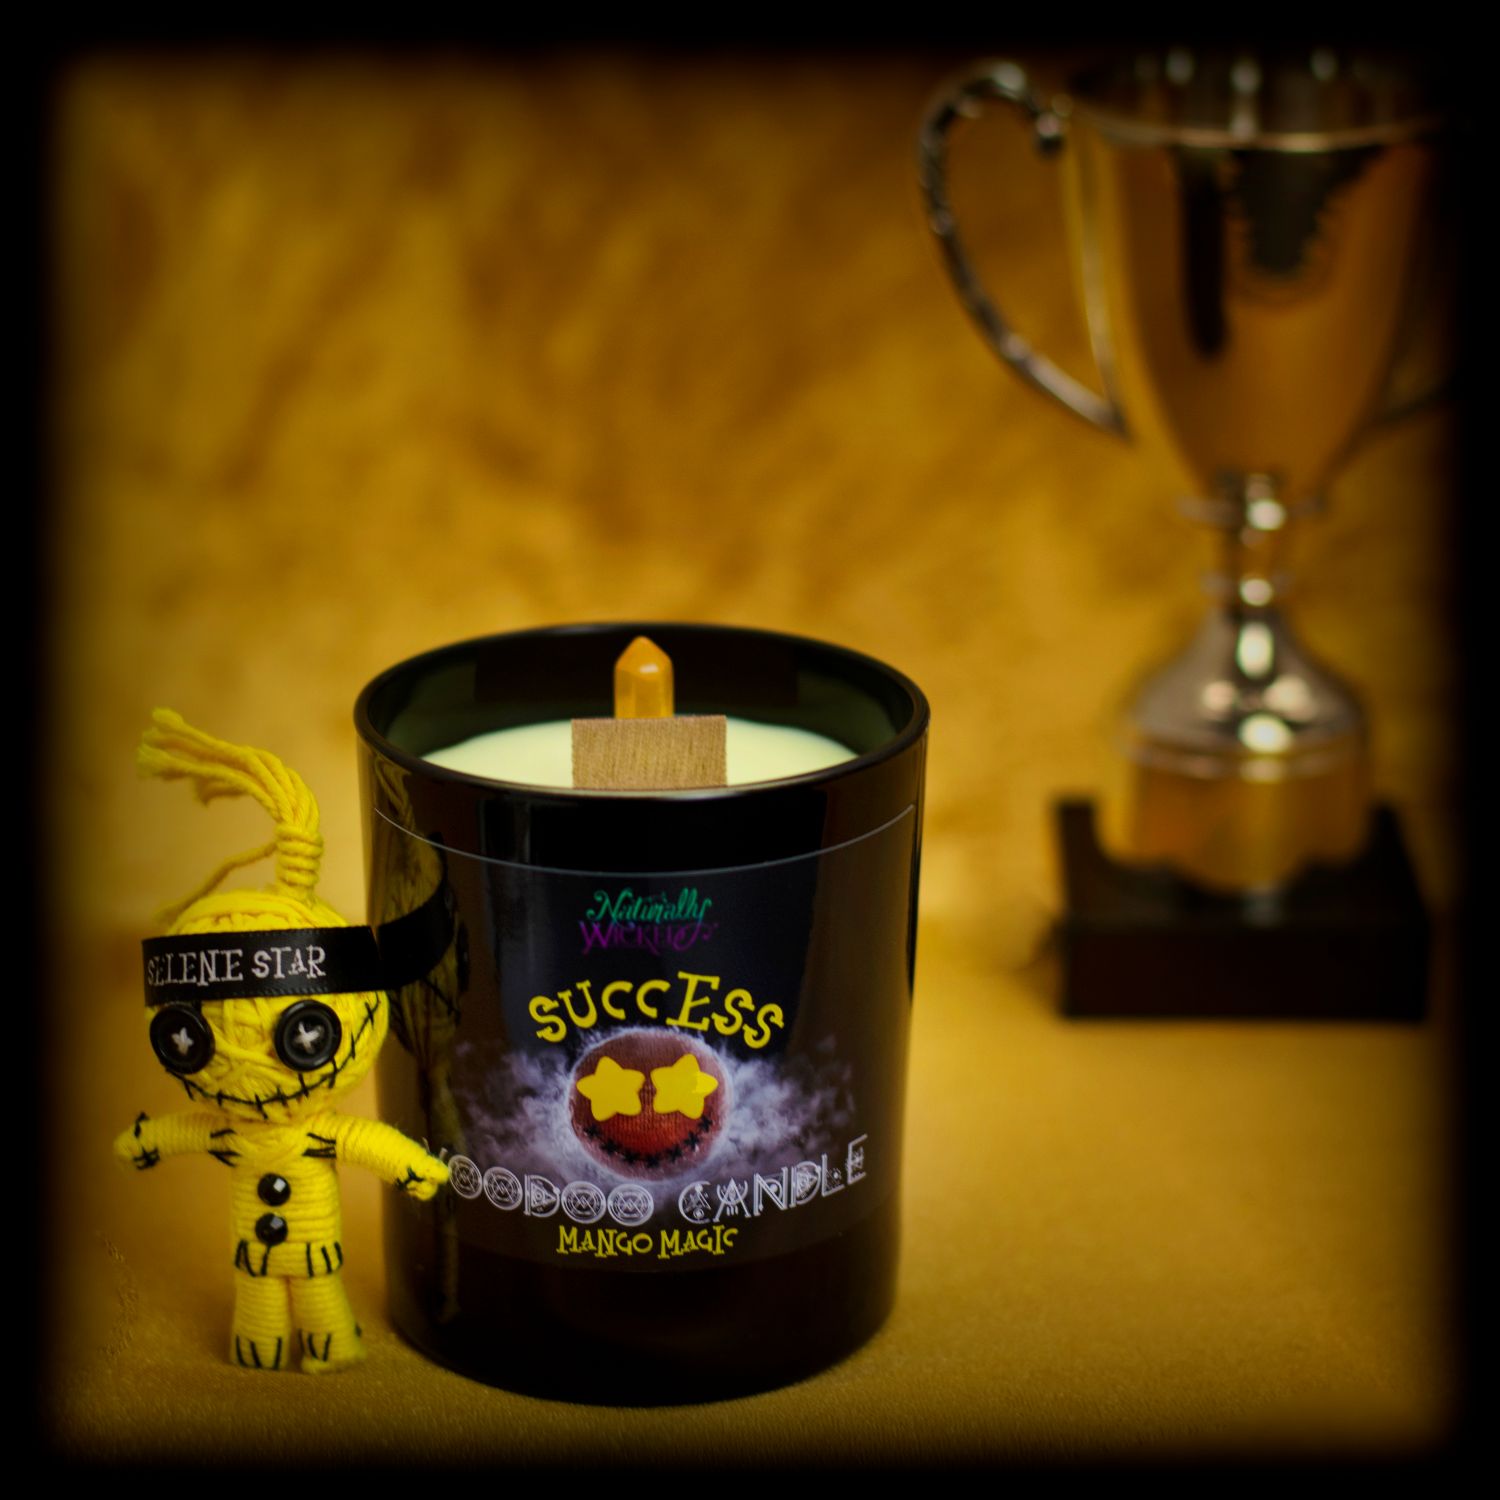 Naturally Wicked Voodoo Success Candle With Yellow Success Voodoo Doll & Gold Trophy